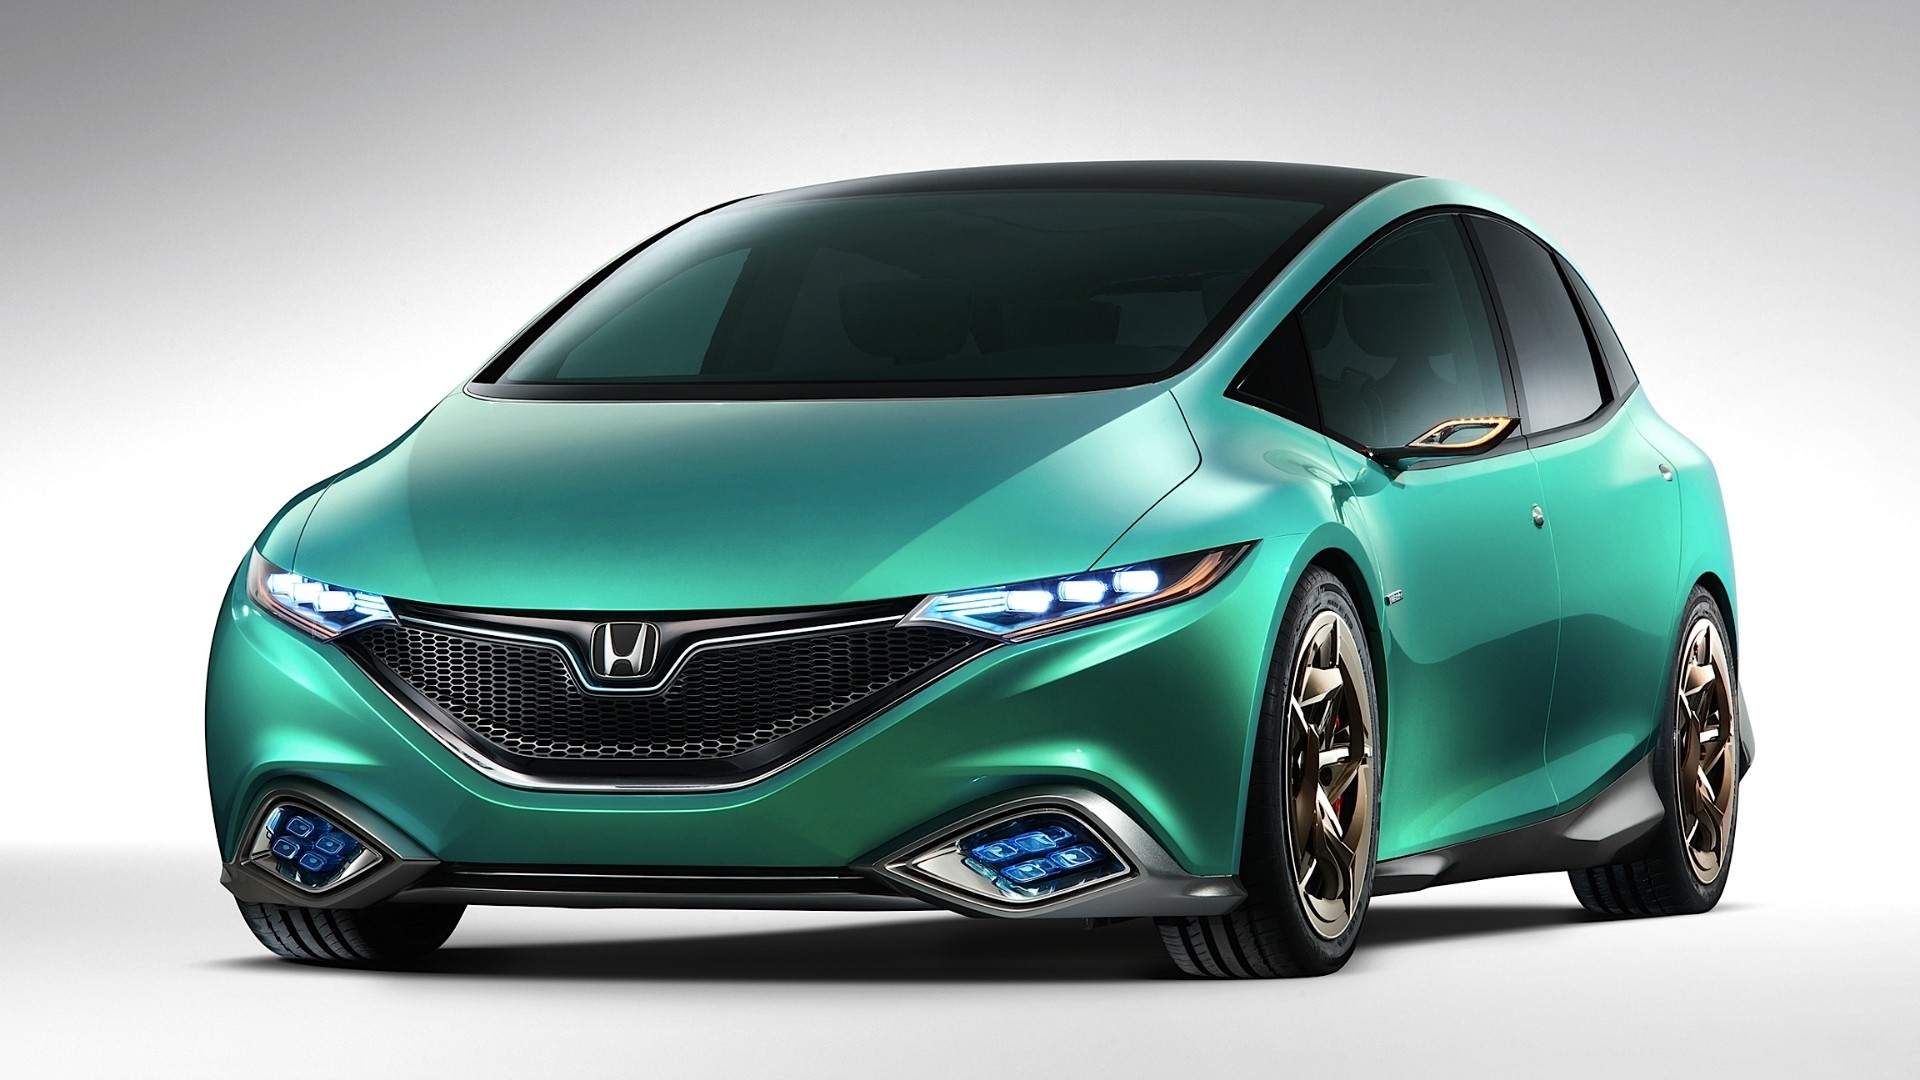 Honda Cars Concept Hd Wallpapers-1080p - 9to5 Car Wallpapers